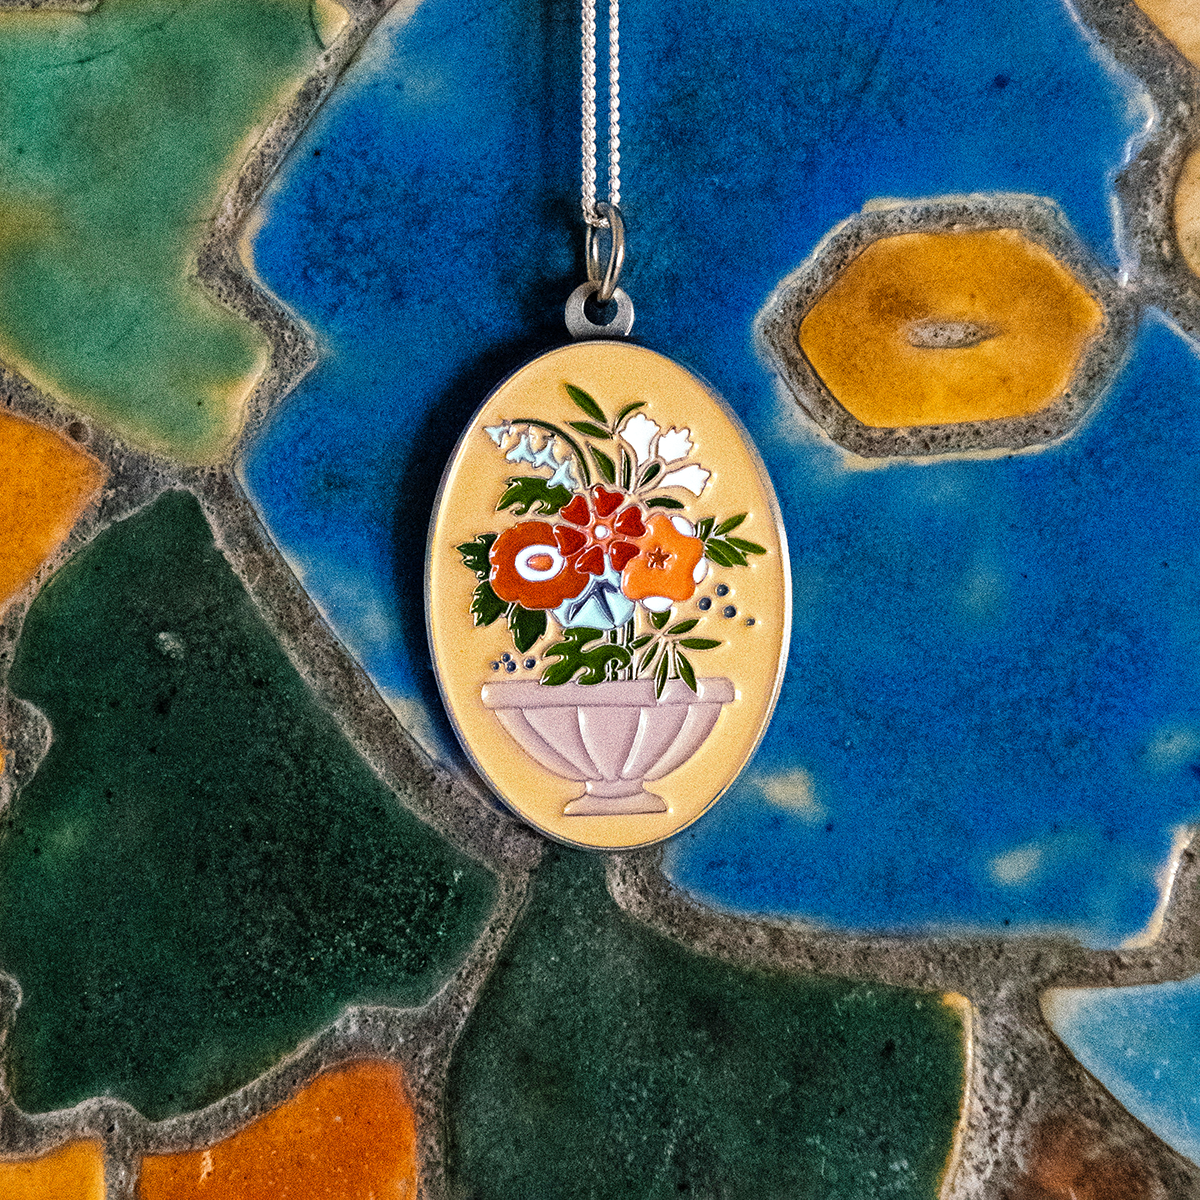 Faceted Tile Necklace  Iridescent – Pewabic Pottery